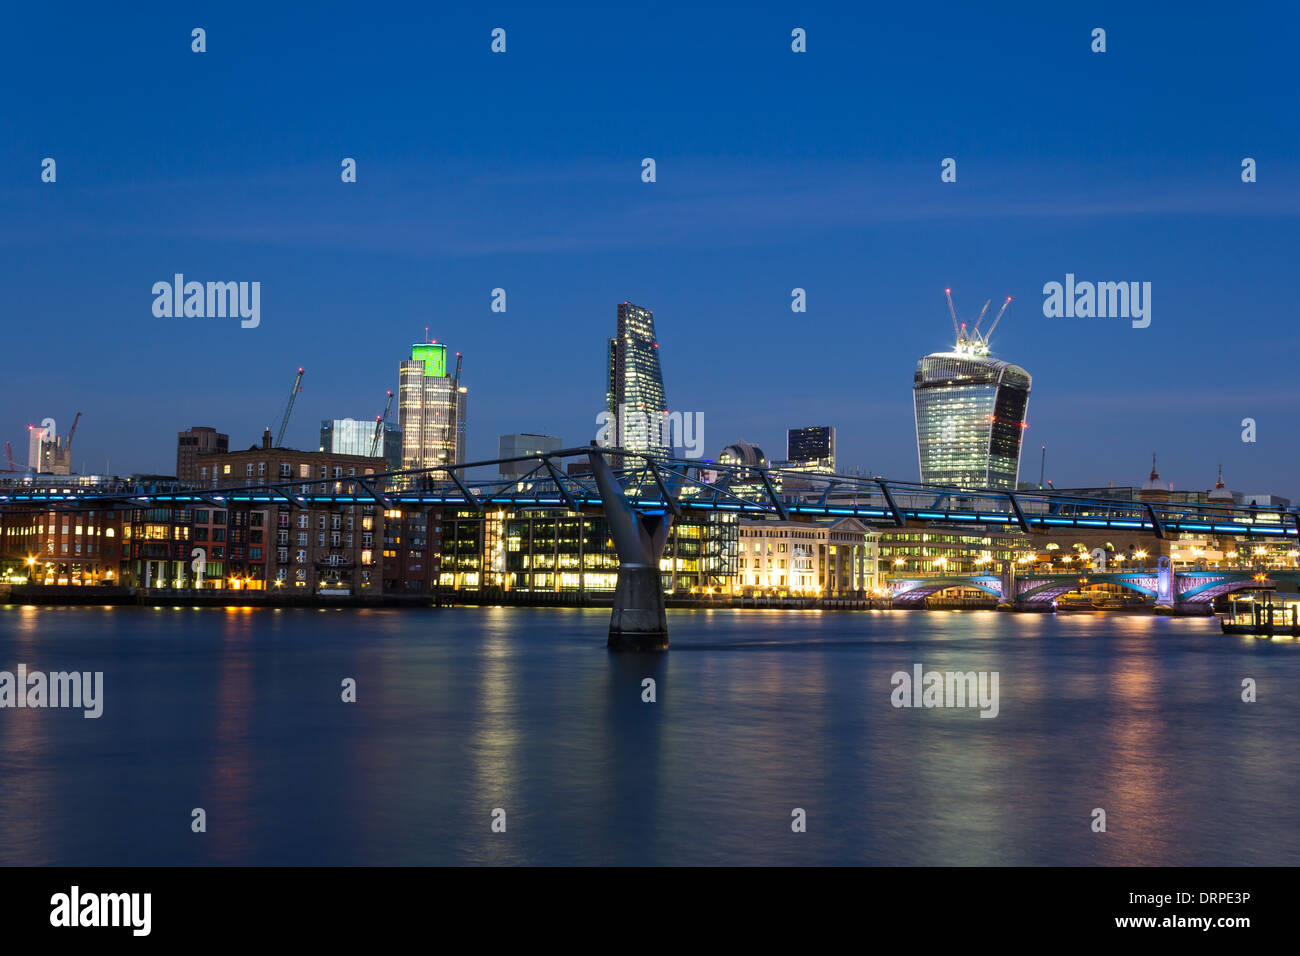 A view of the City of London at Dusk Stock Photo